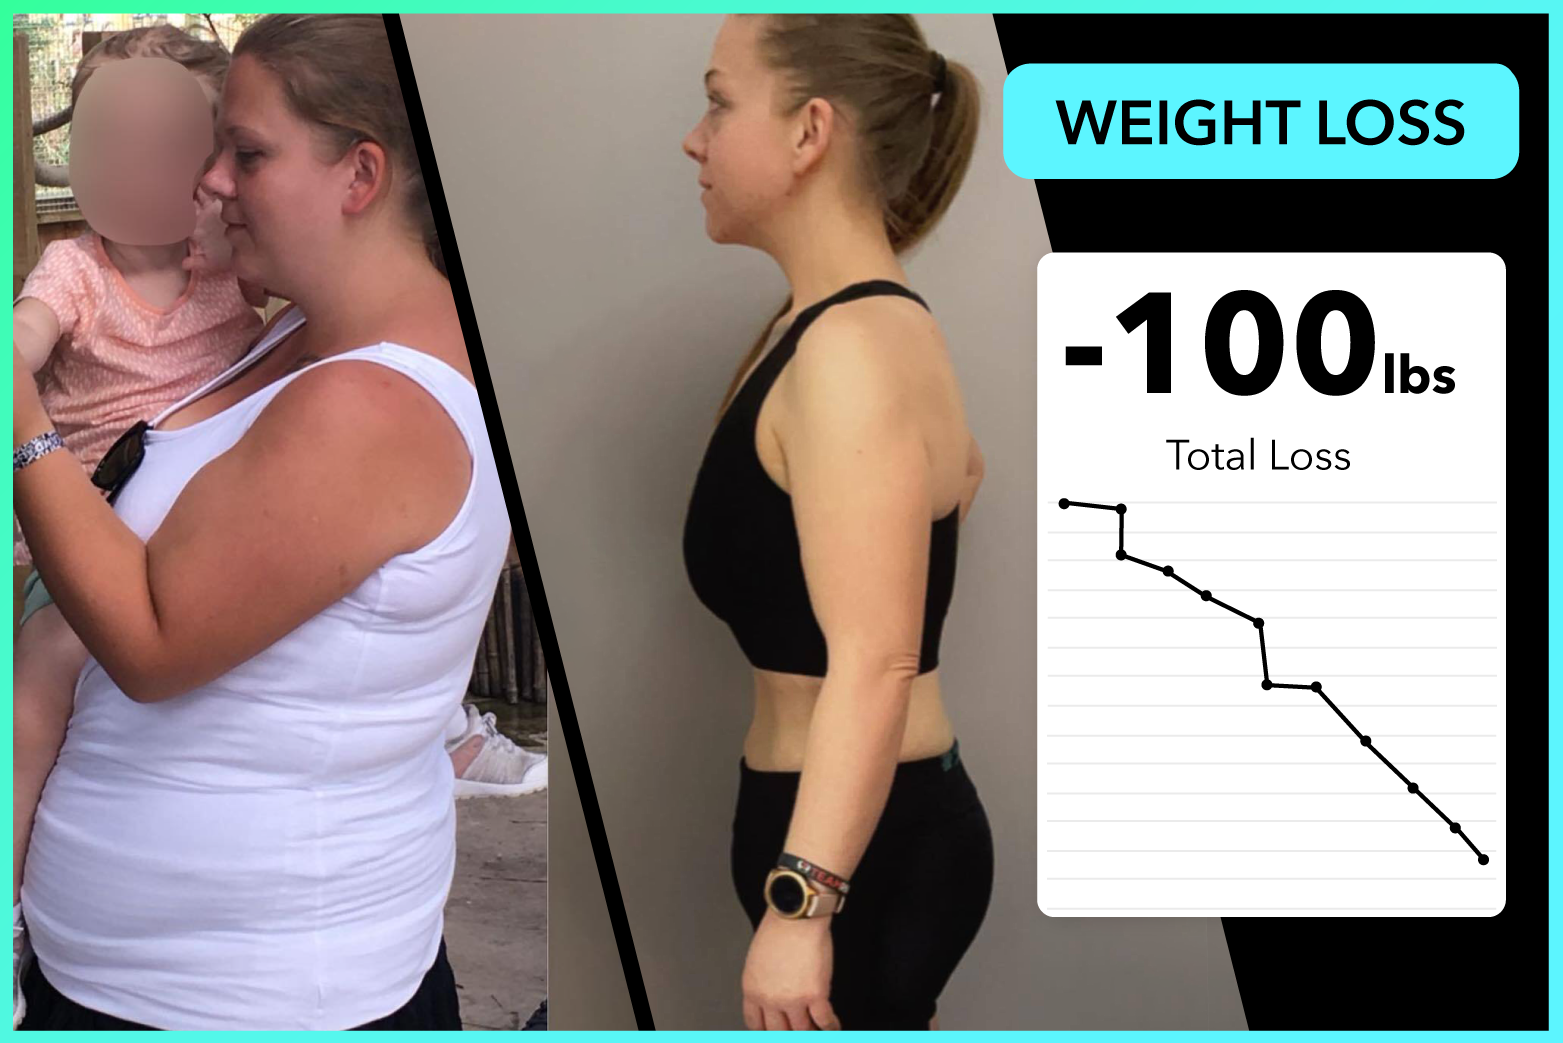 Emma lost 100lbs with Team RH and changed her life